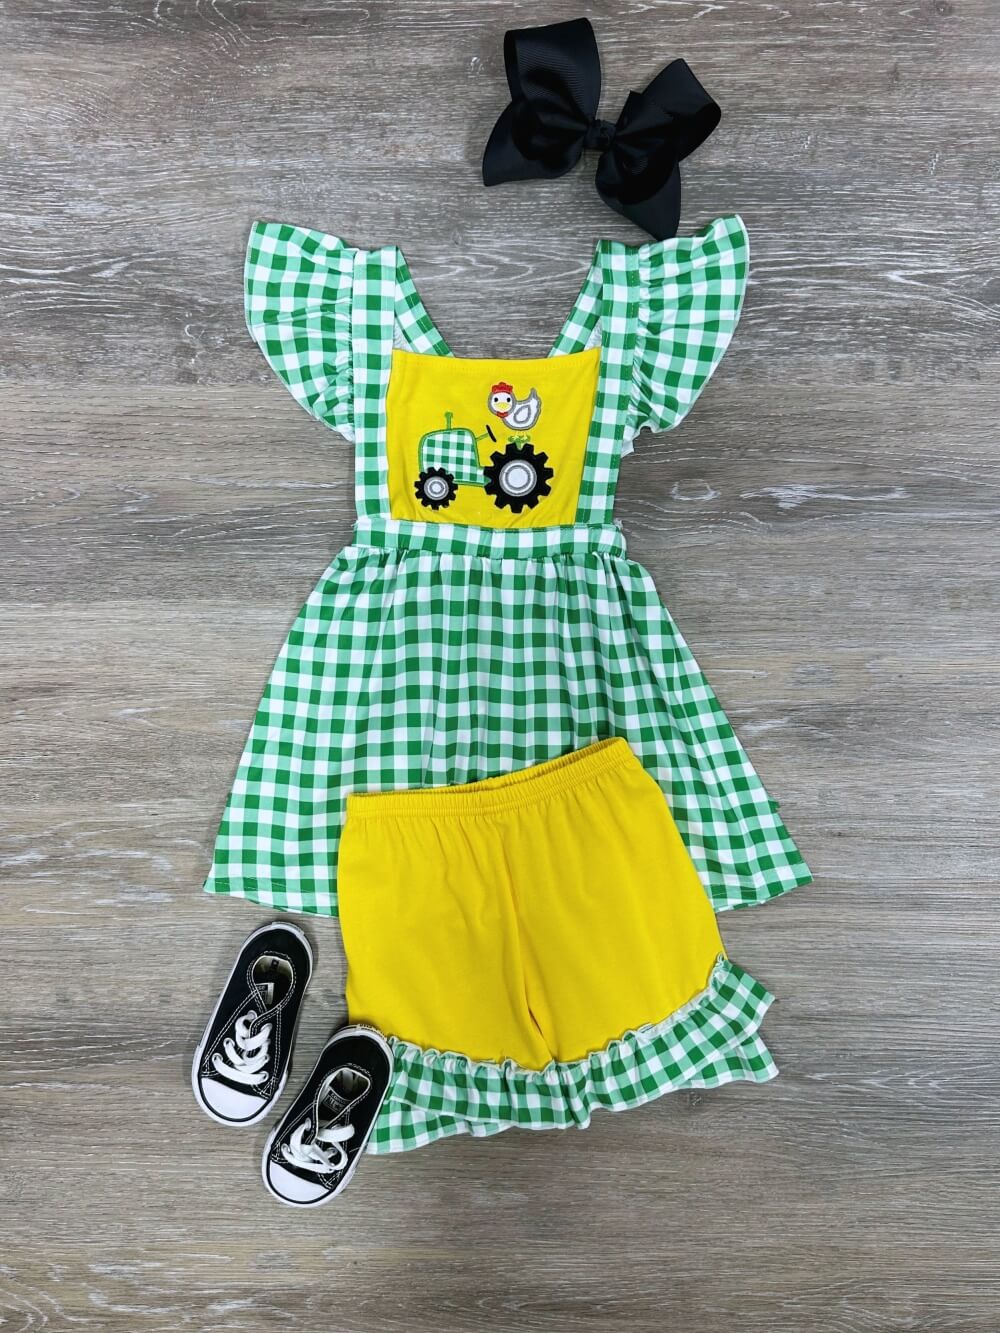 Green & Yellow Farm Tractor Girls Gingham Plaid Shorts Outfit